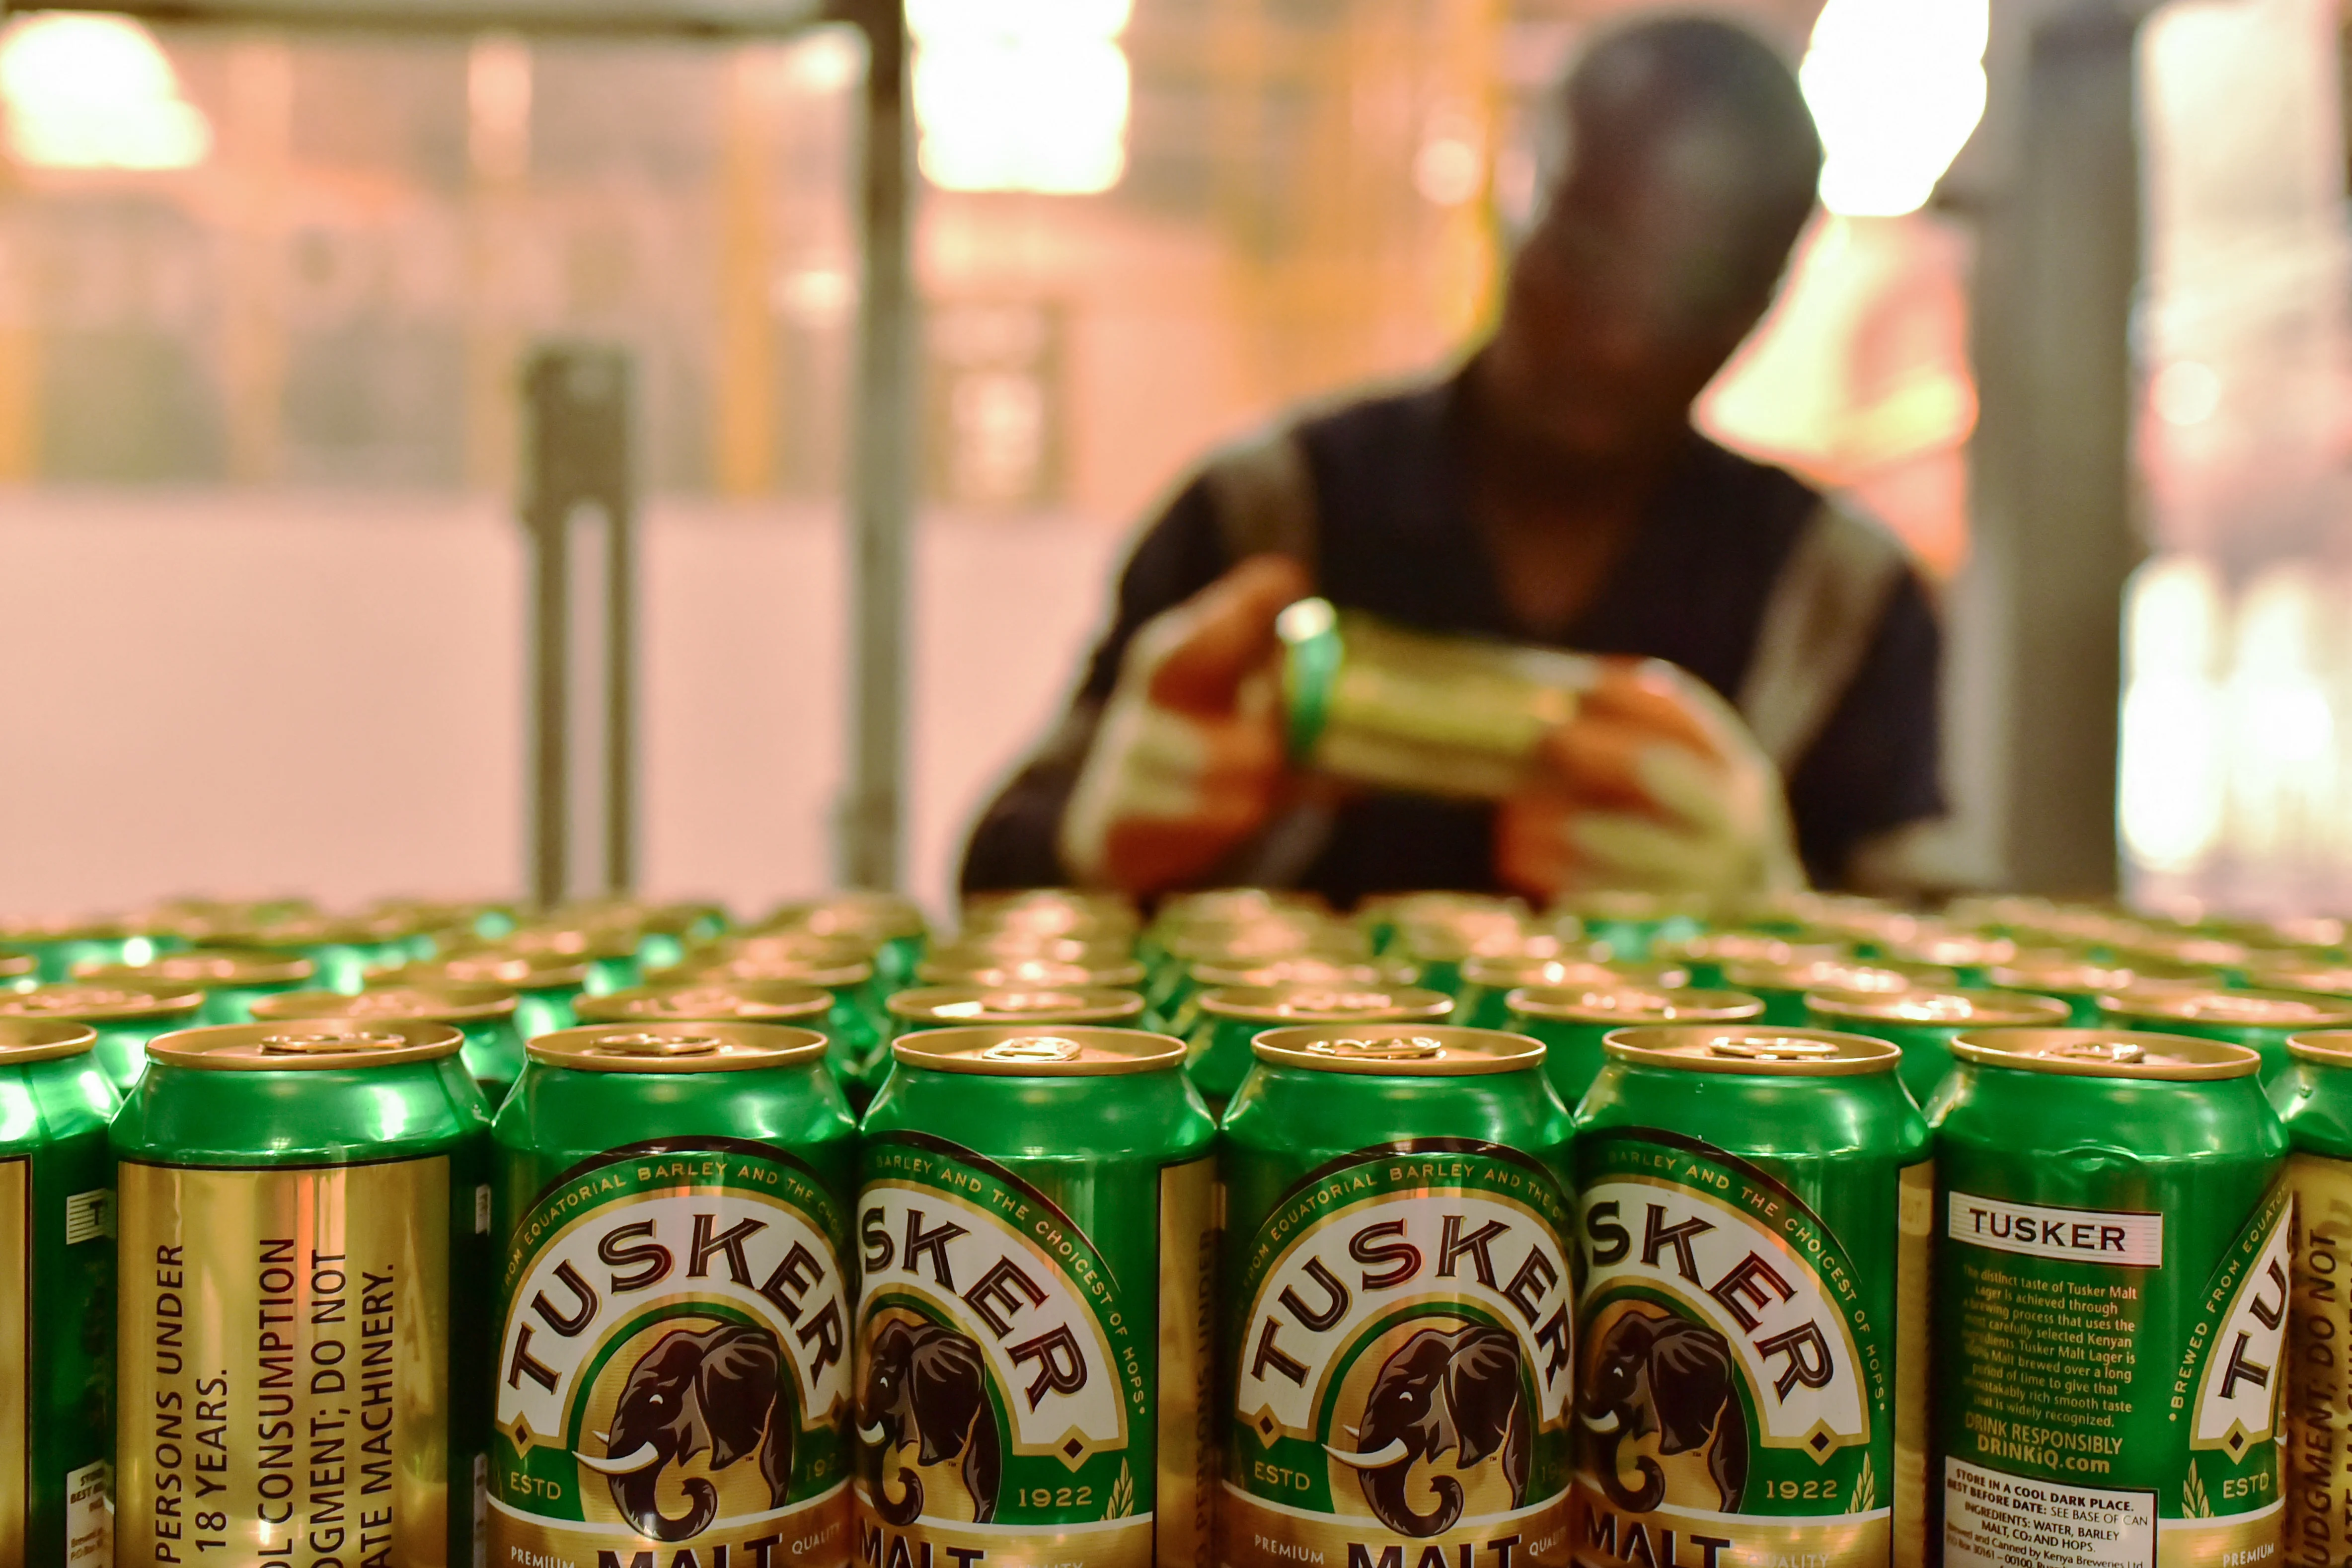 Kenya's Alcohol Tax Reforms: Impact on Brewers and Consumers